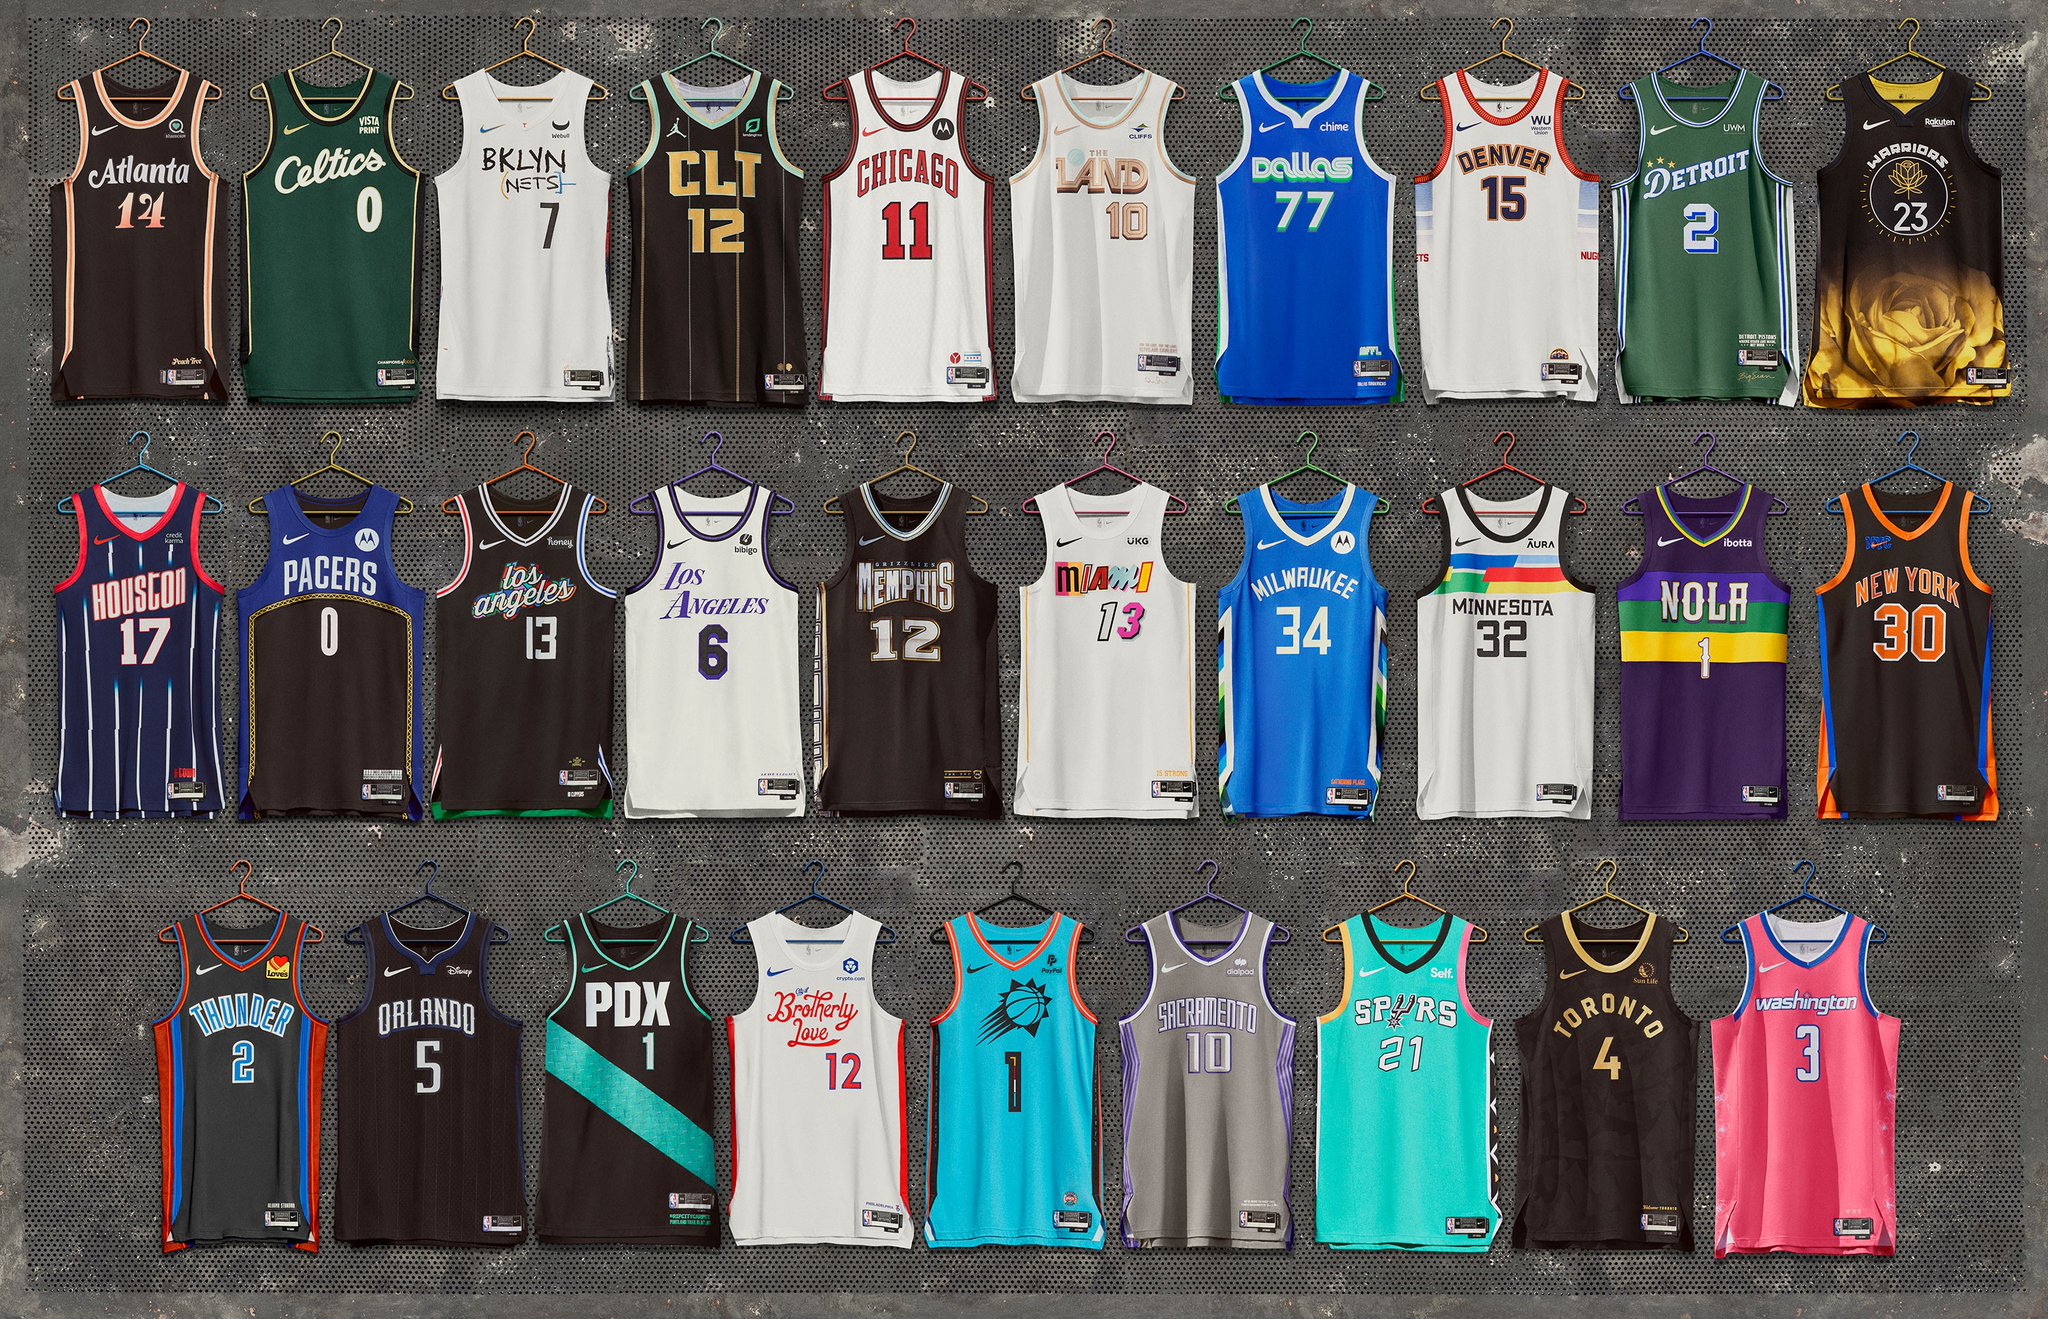 Nick DePaula on X: Since Nike took over NBA uniforms in 2017, they've  stuck with a focus on City Edition jerseys for teams rather than a Christmas  specific design. That'll be the